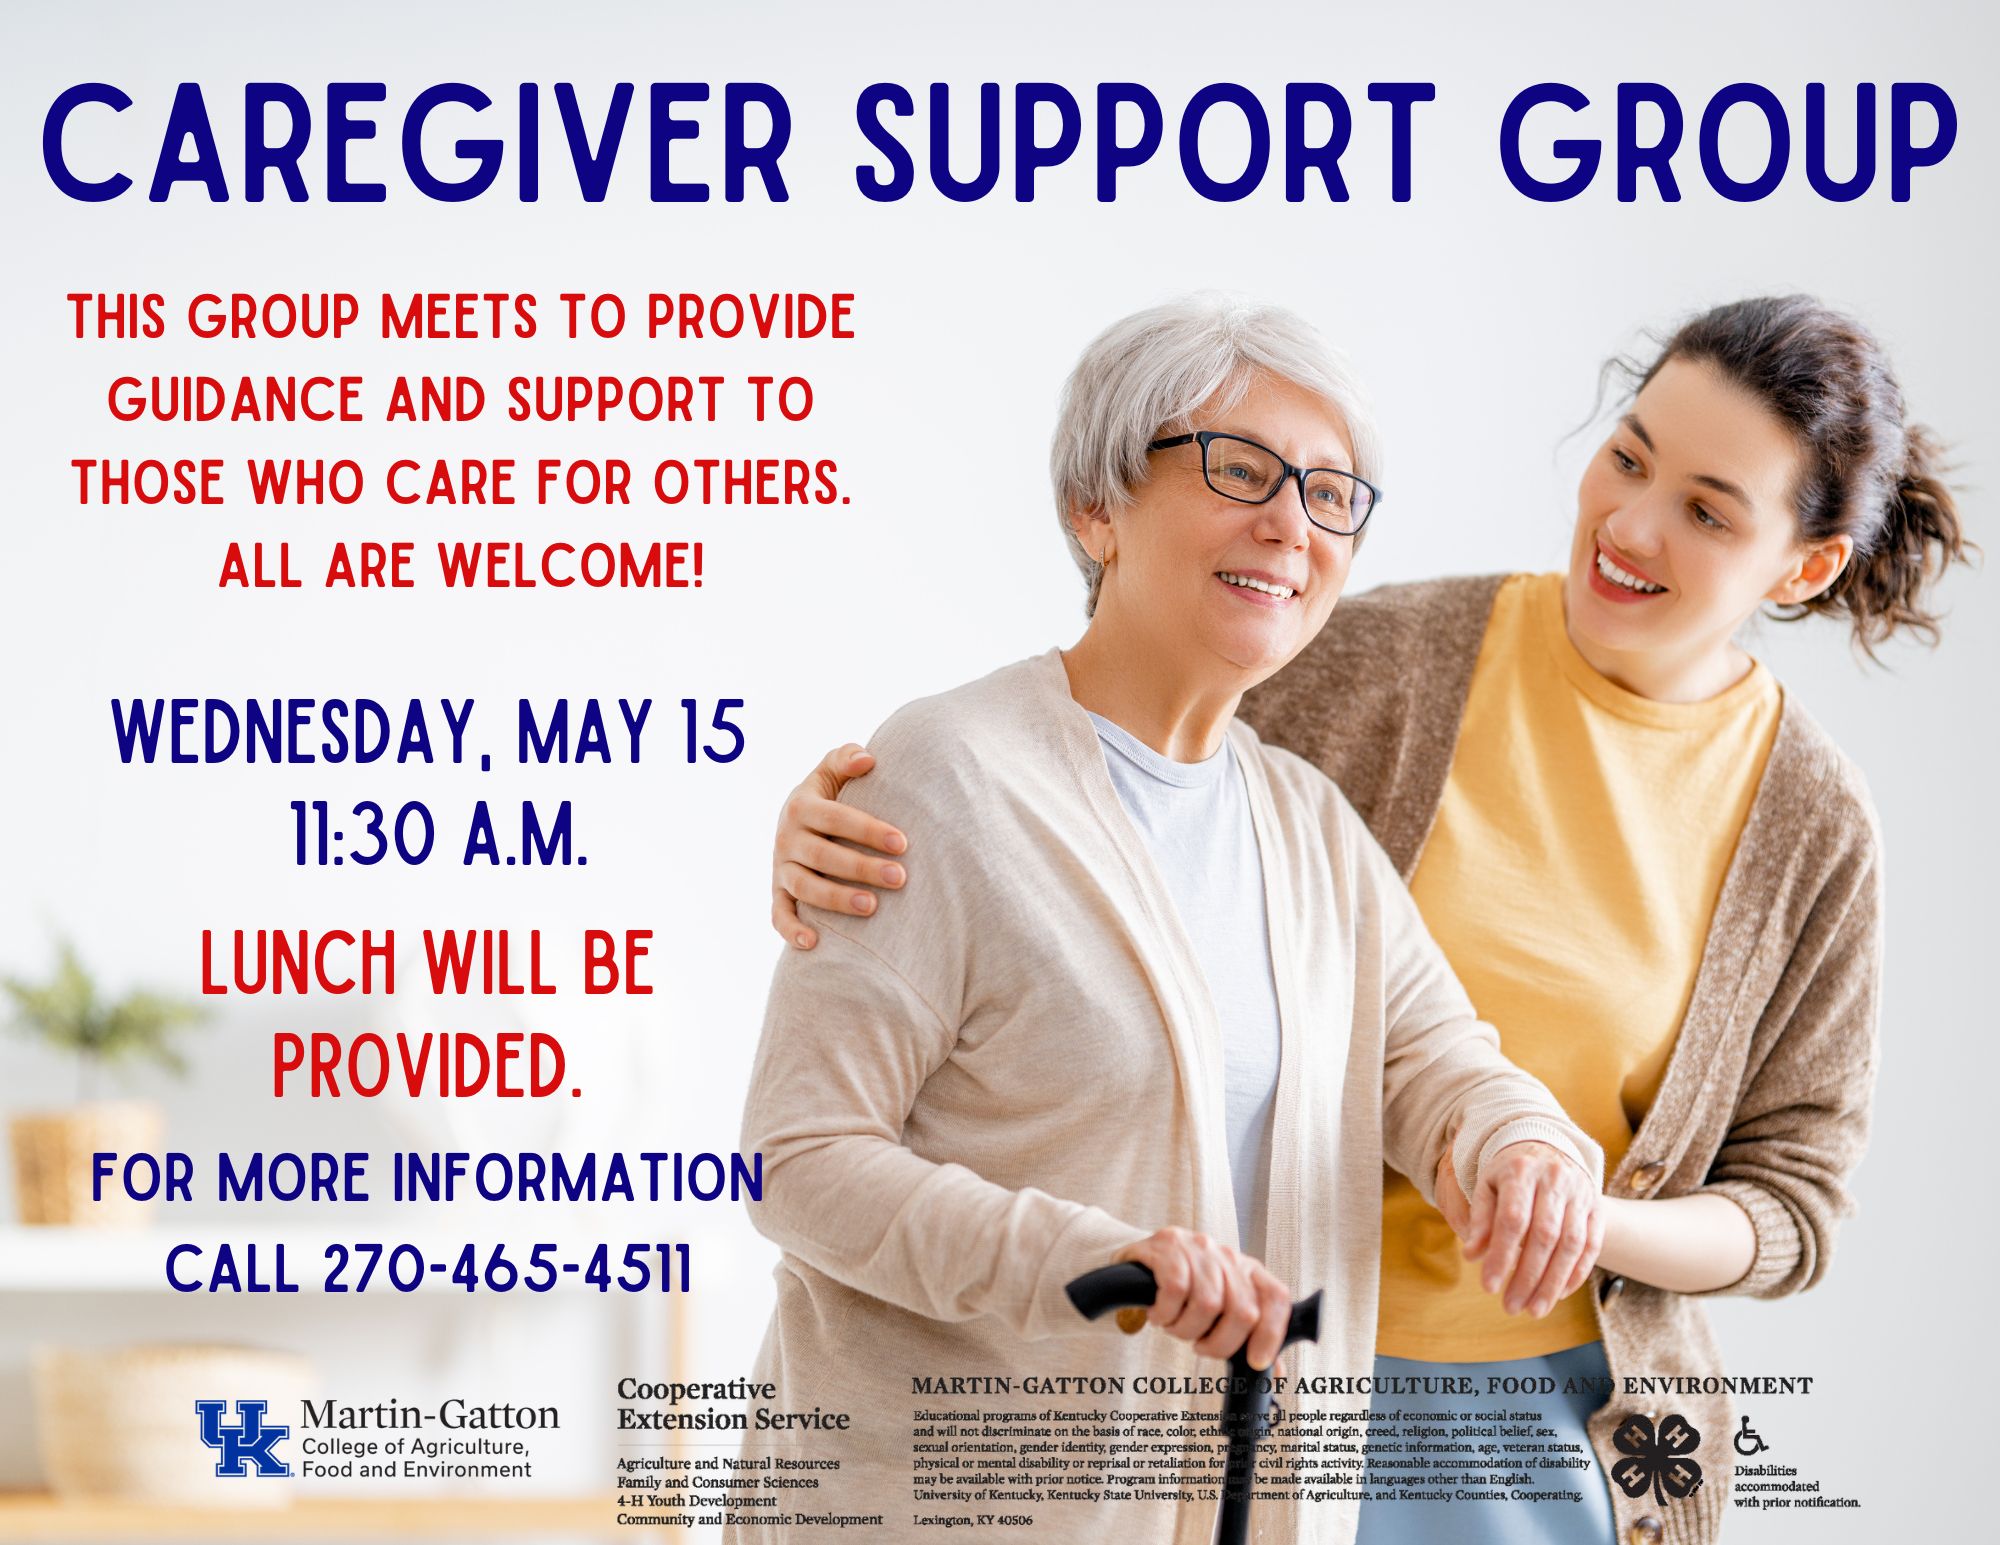 Caregivers support group